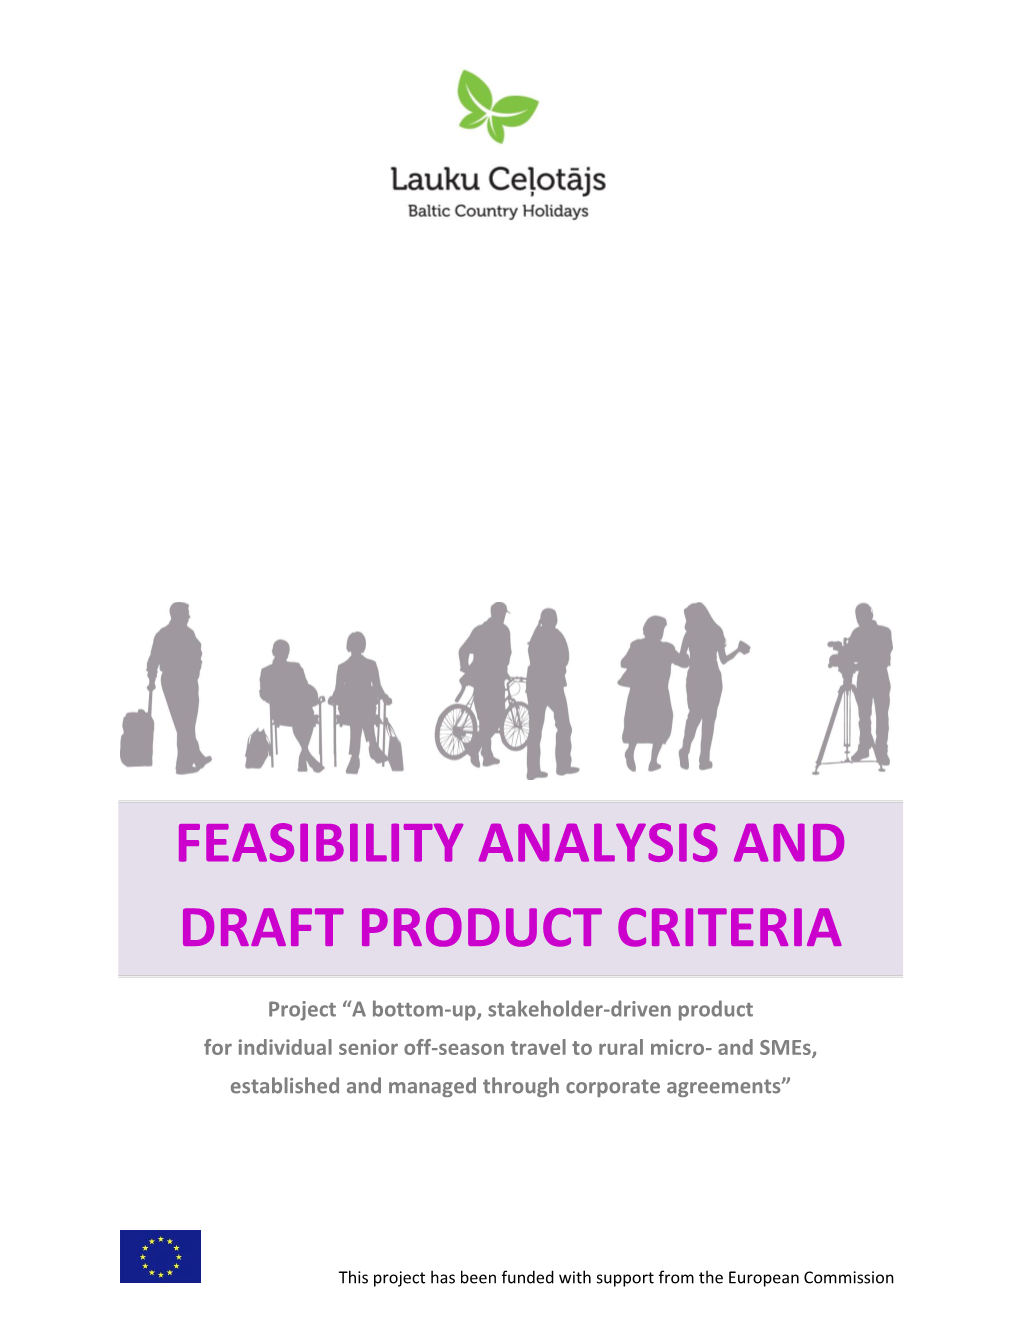 Feasibility Analysis and Draft Product Criteria